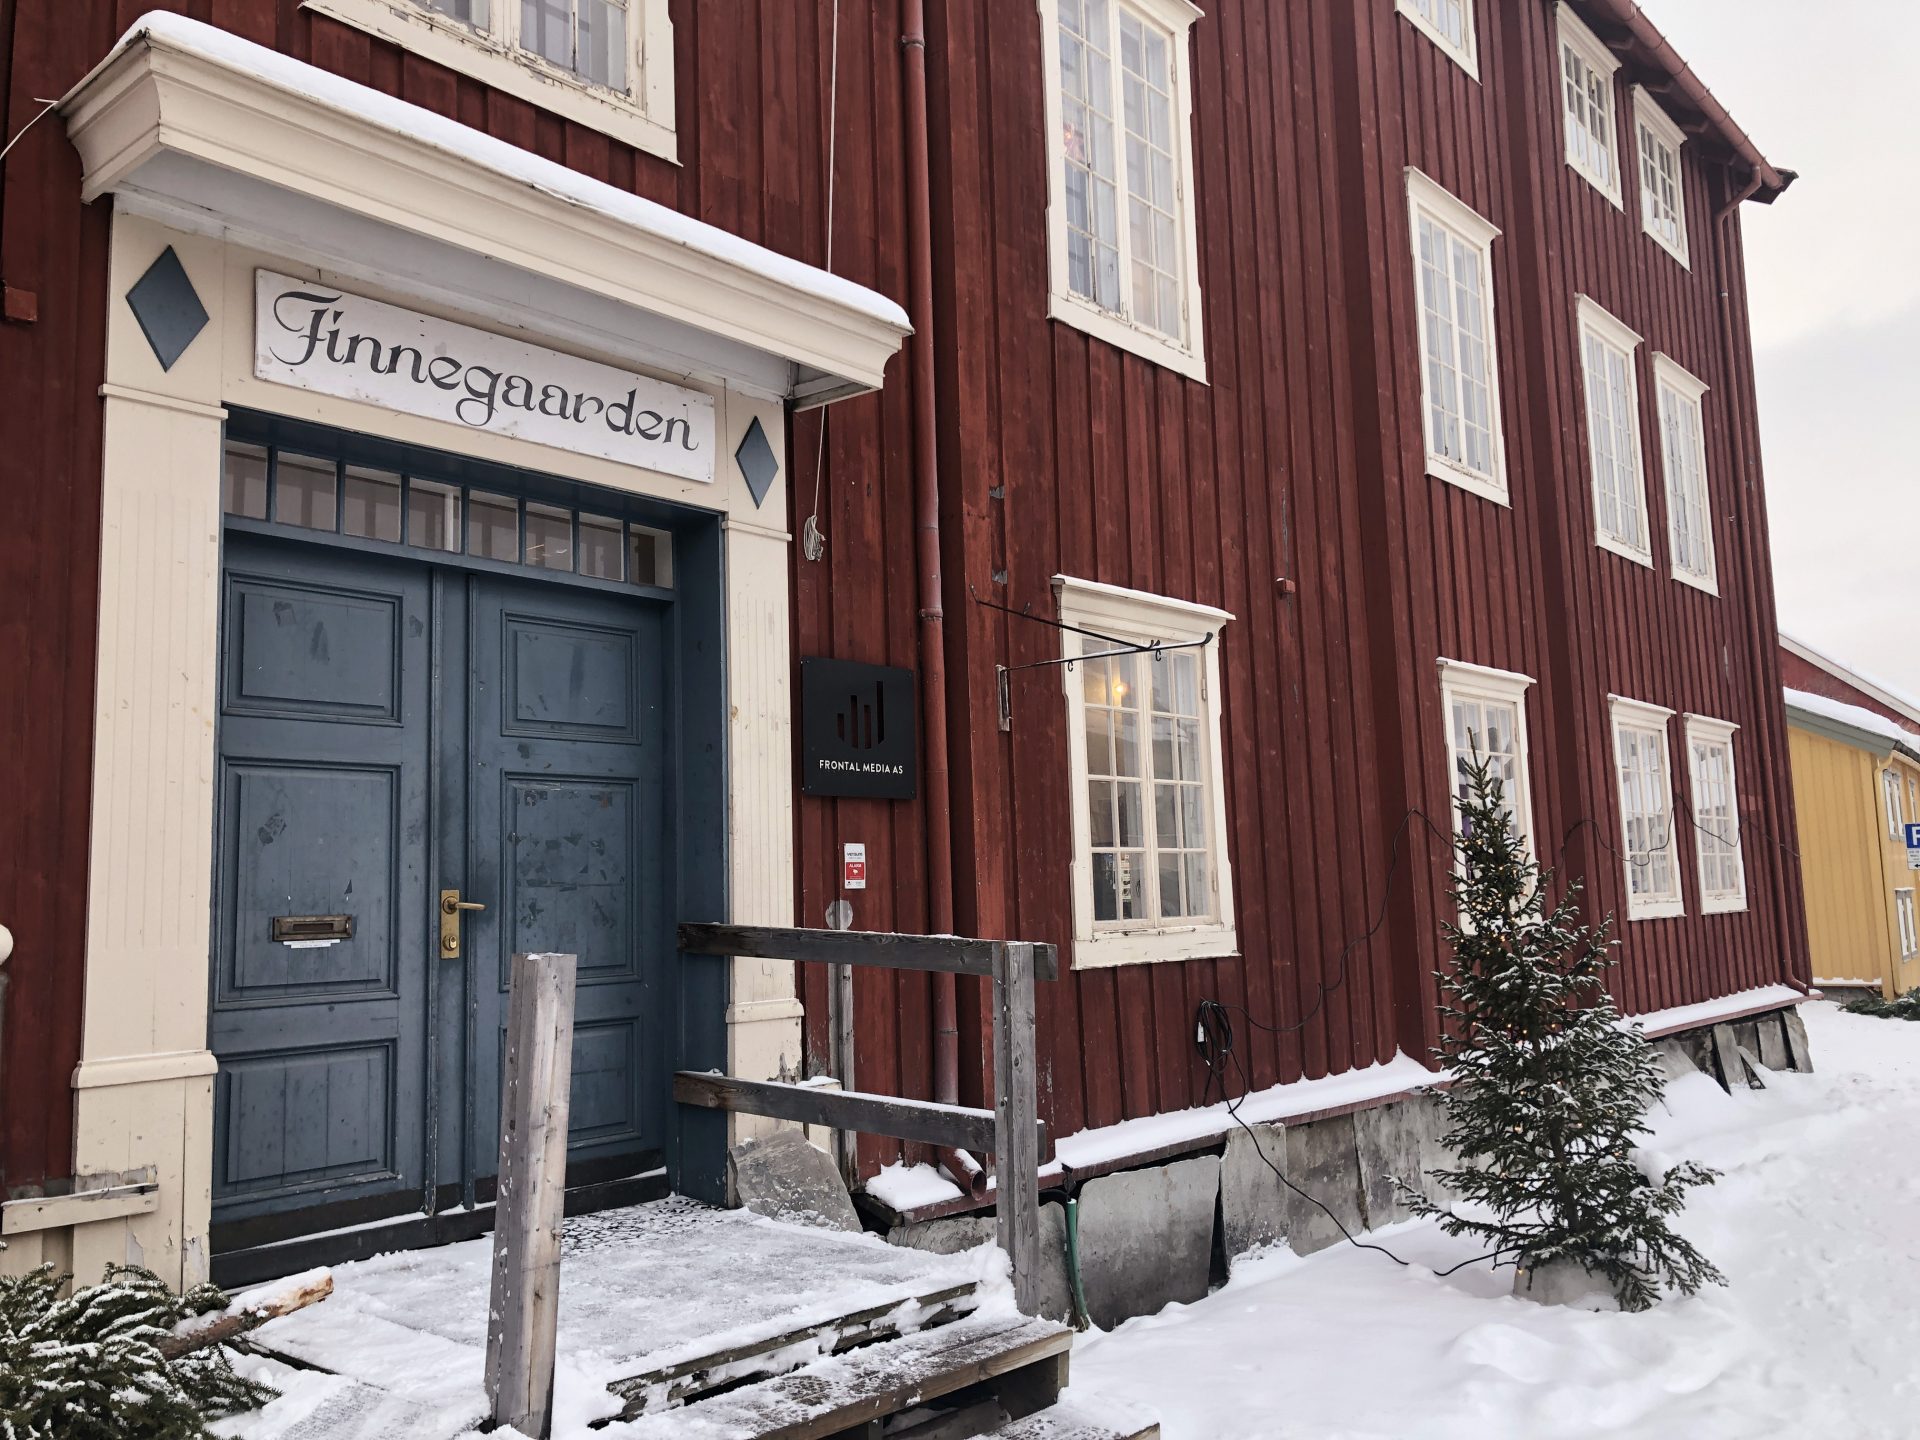 Finnegaarden in Røros became a listed building in 2018. Photo: